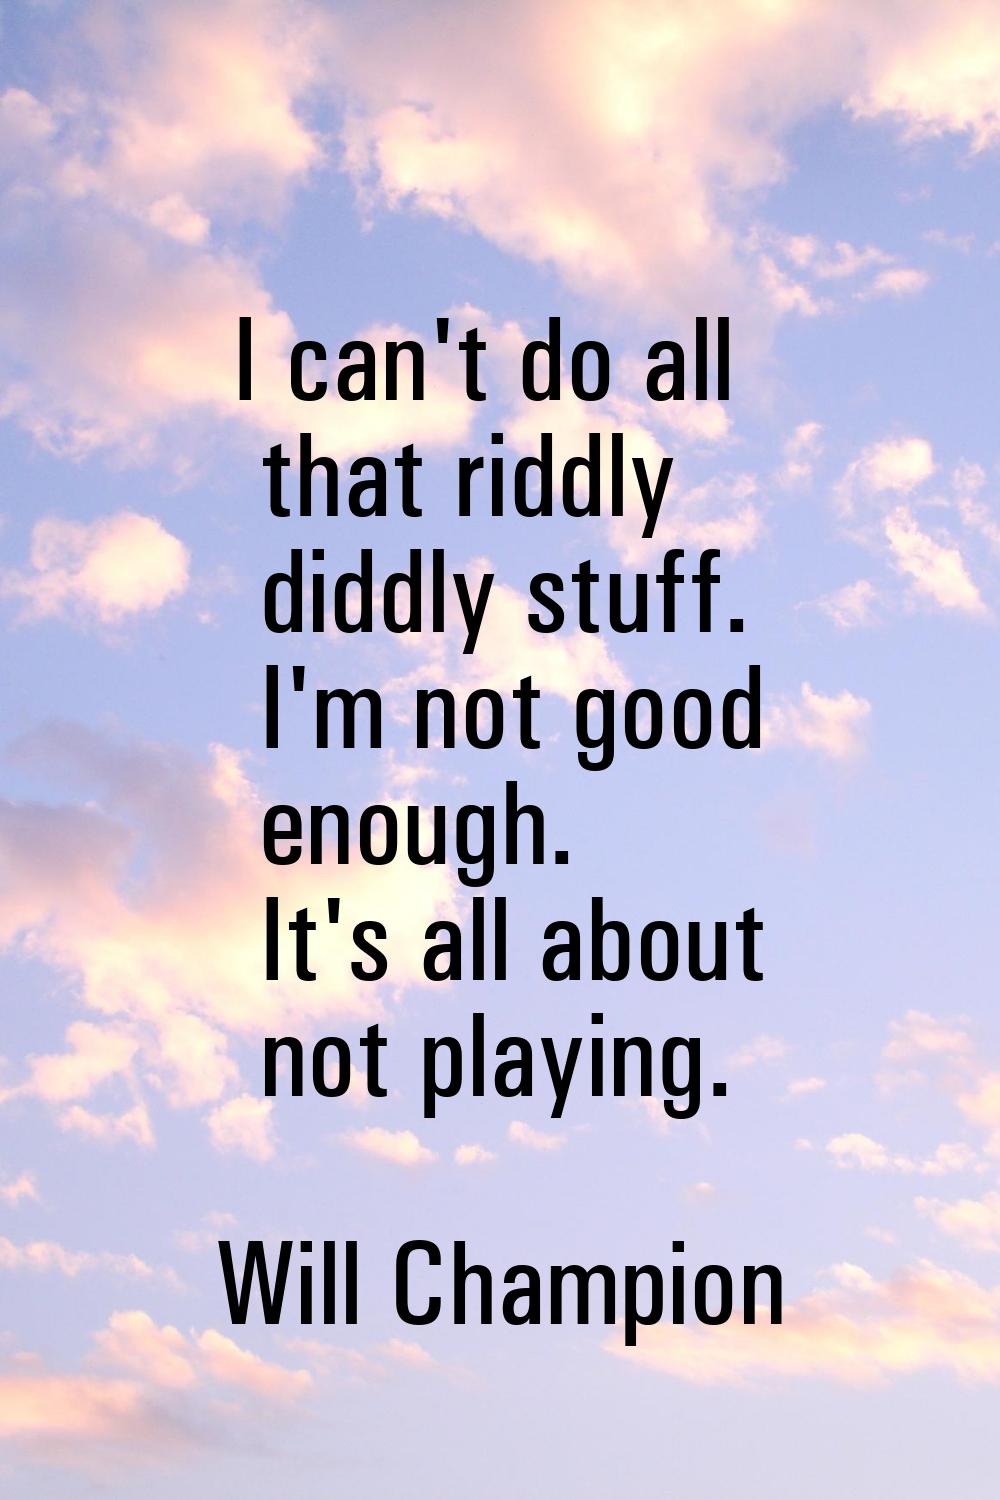 I can't do all that riddly diddly stuff. I'm not good enough. It's all about not playing.